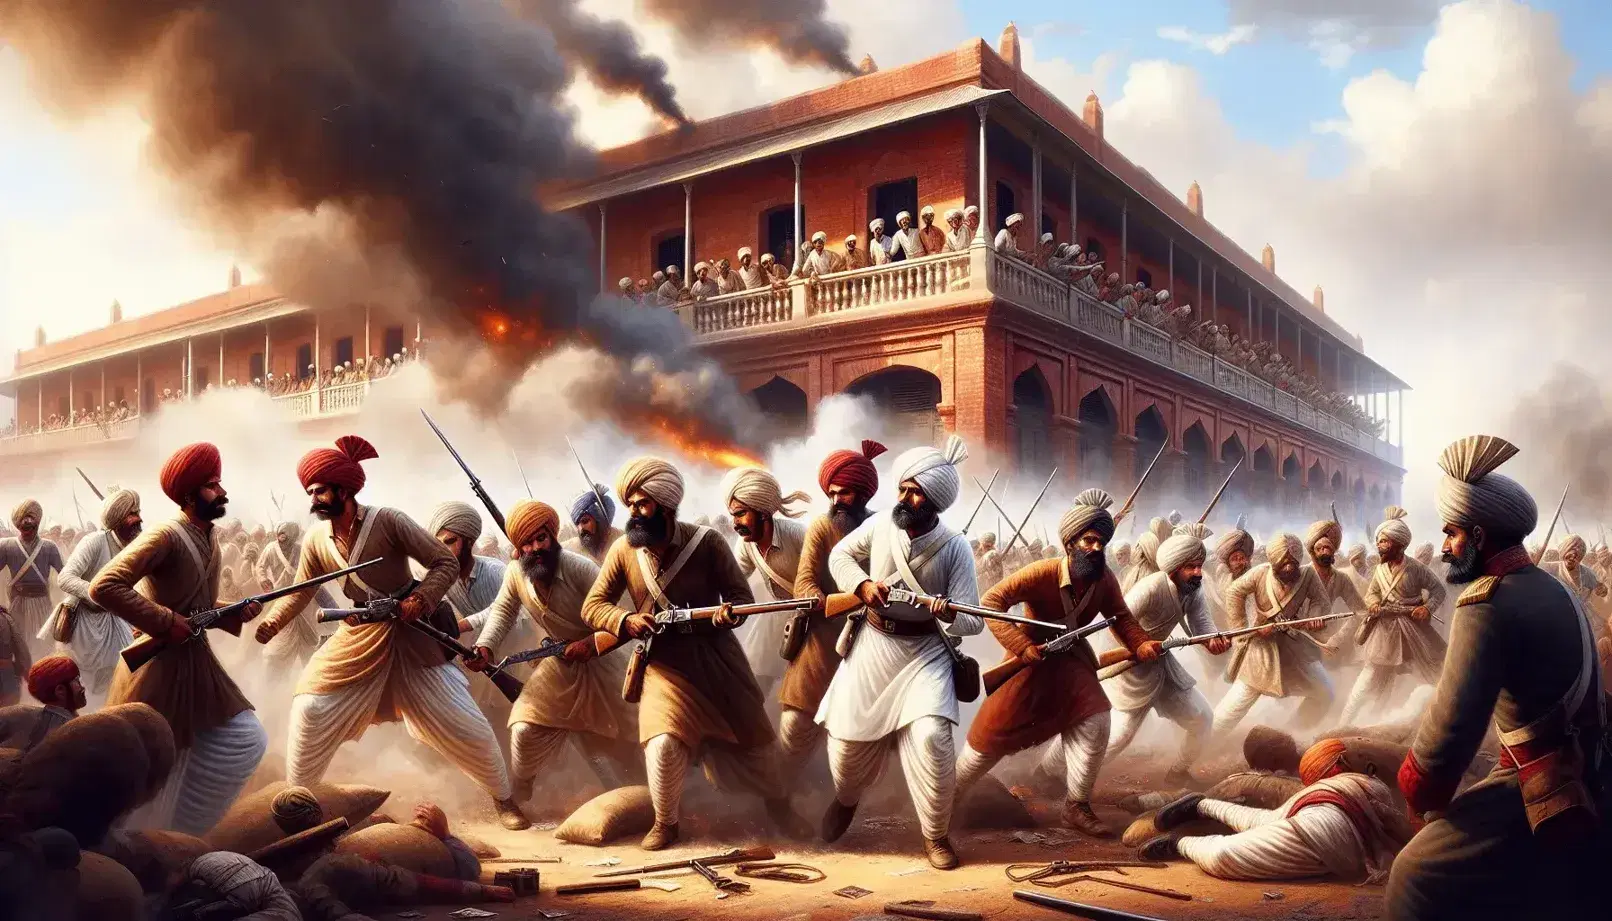 Sepoy Rebellion scene with Indian soldiers wielding rifles and swords amid battle smoke, near a damaged British colonial building under a clear sky.